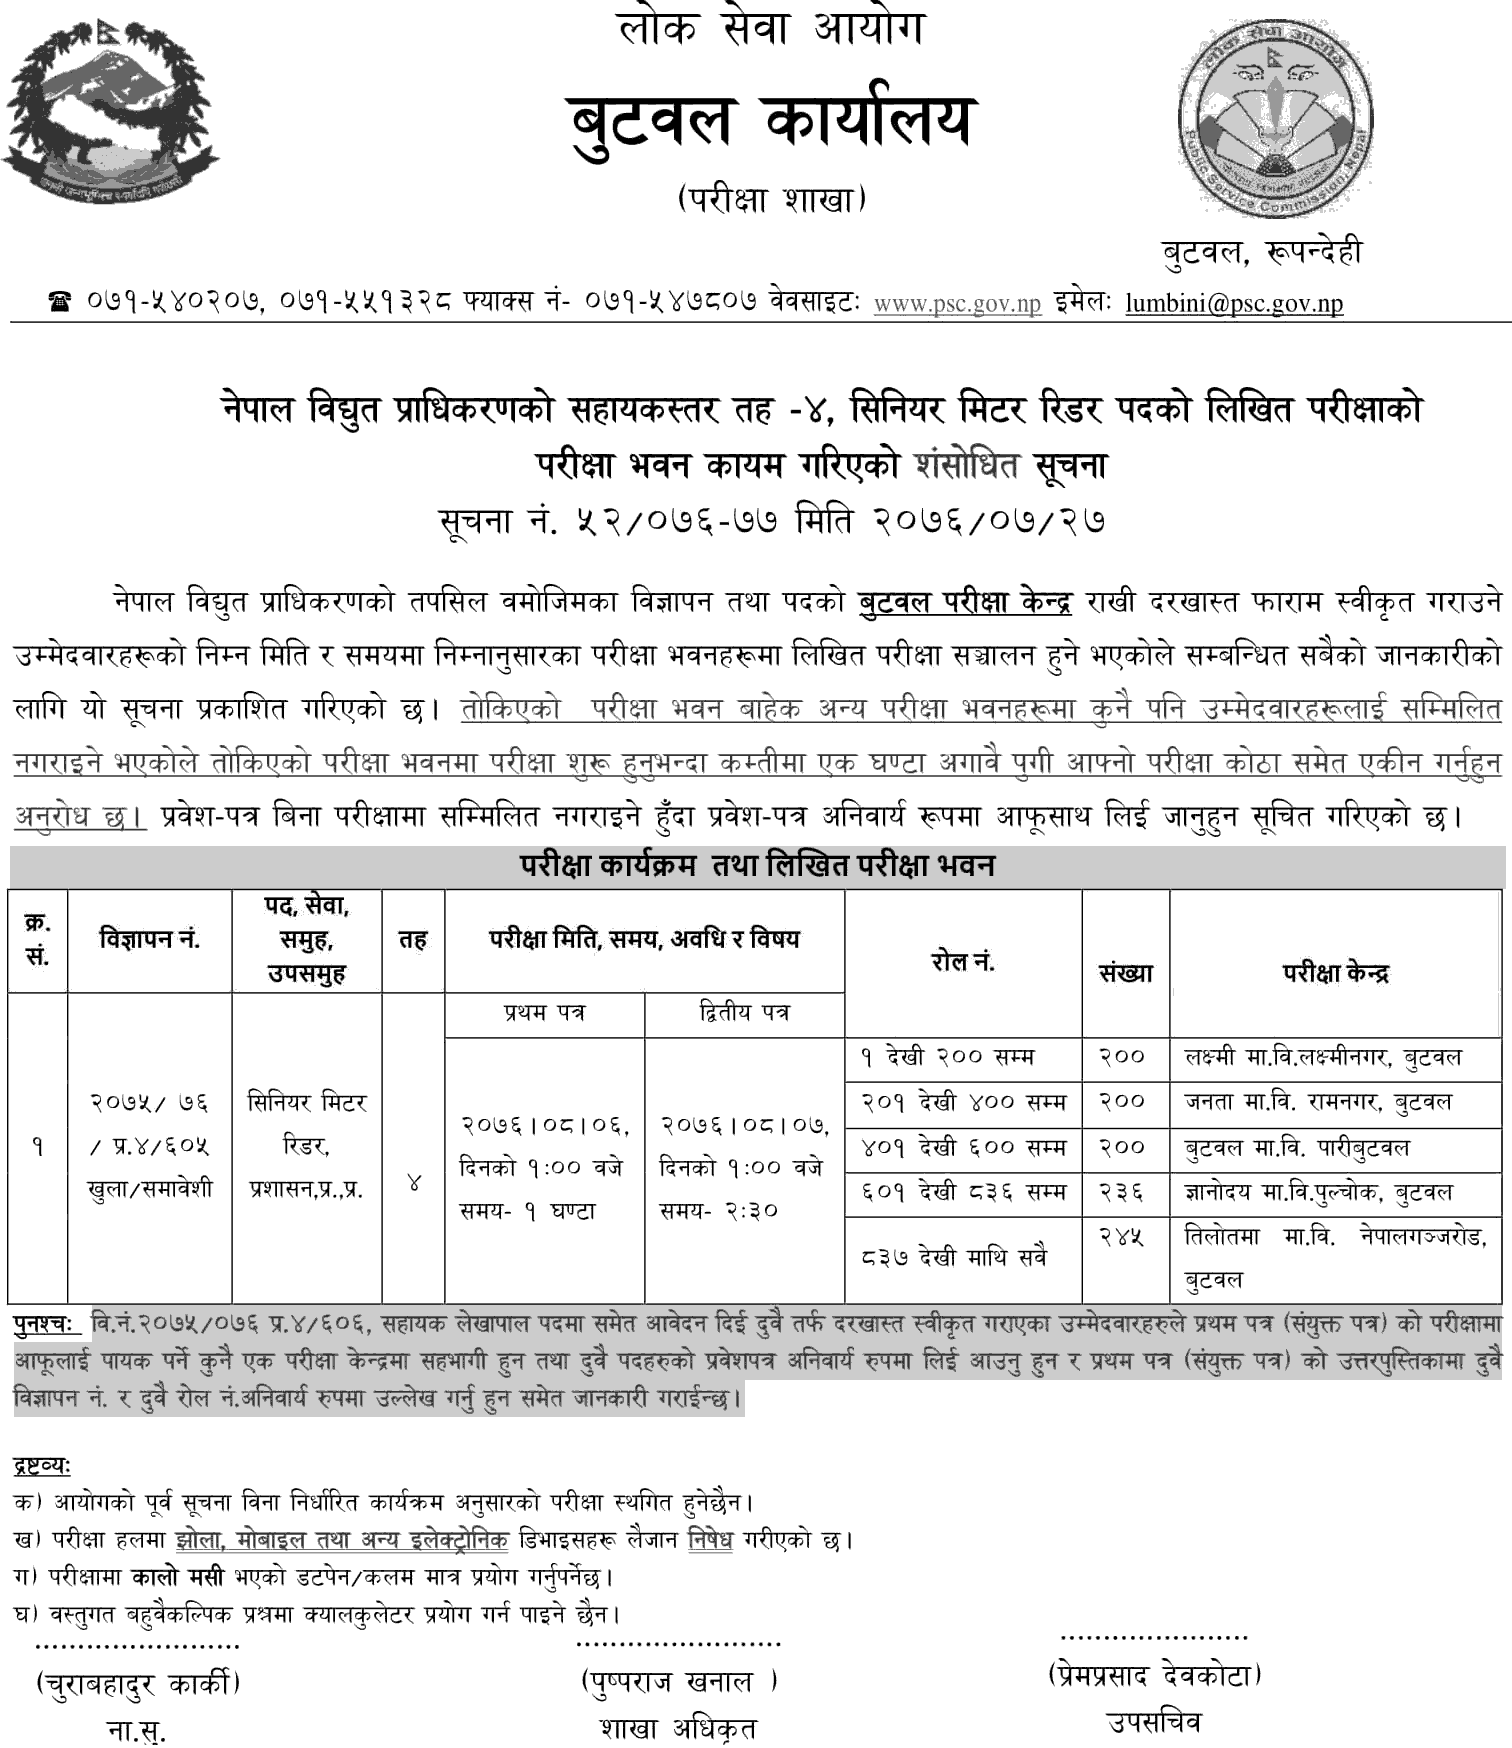 Nepal Electricity Authority Butwal Senior Meter Reader Exam Center Revised